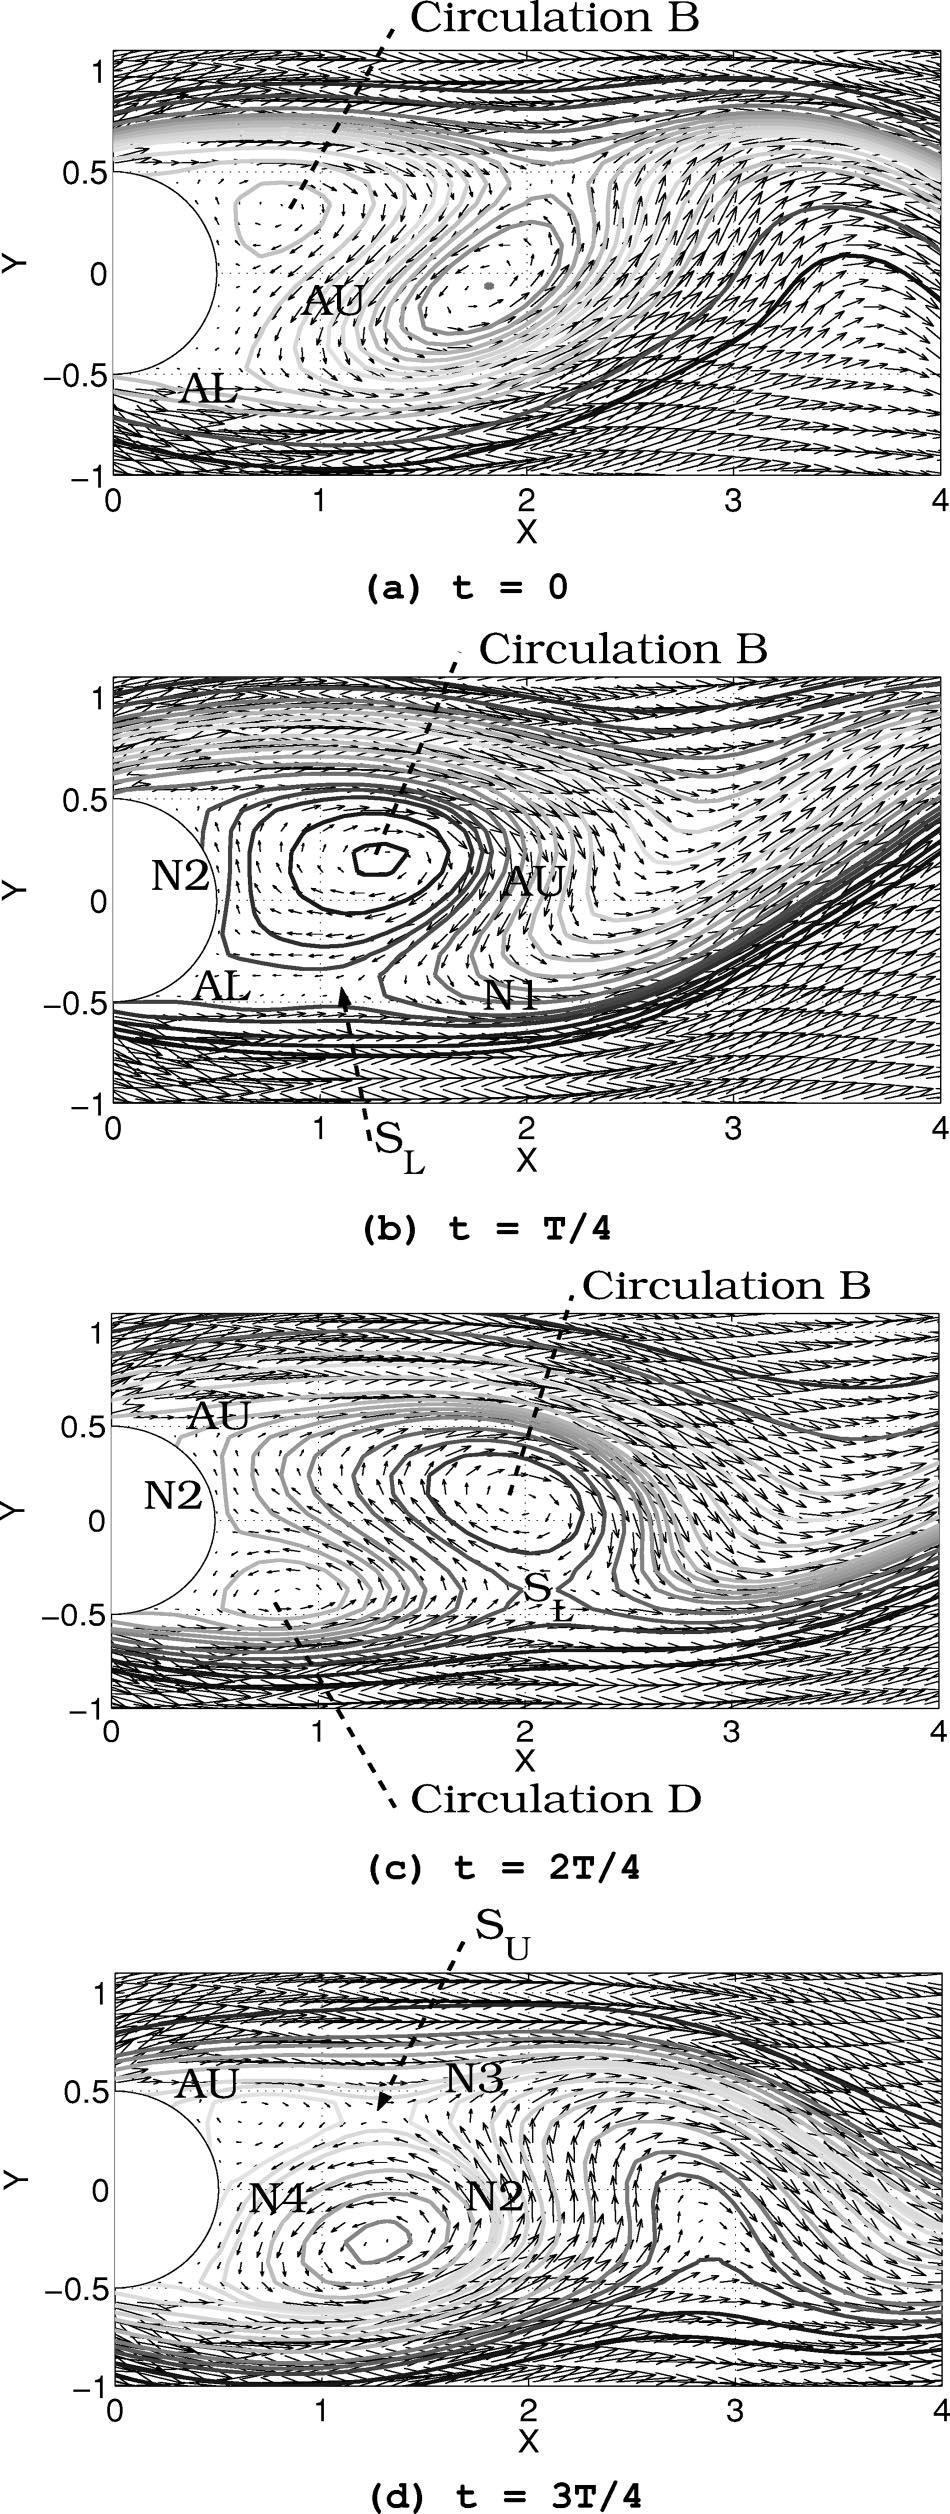 3110 Phys. Fluids, Vol. 16, No. 8, August 2004 Ren, Rindt, and van Steenhoven FIG. 12. Calculated isotemperature lines at an out-of-plume position at Re 85 and Ri 1.0. Numbers indicate temperature values.